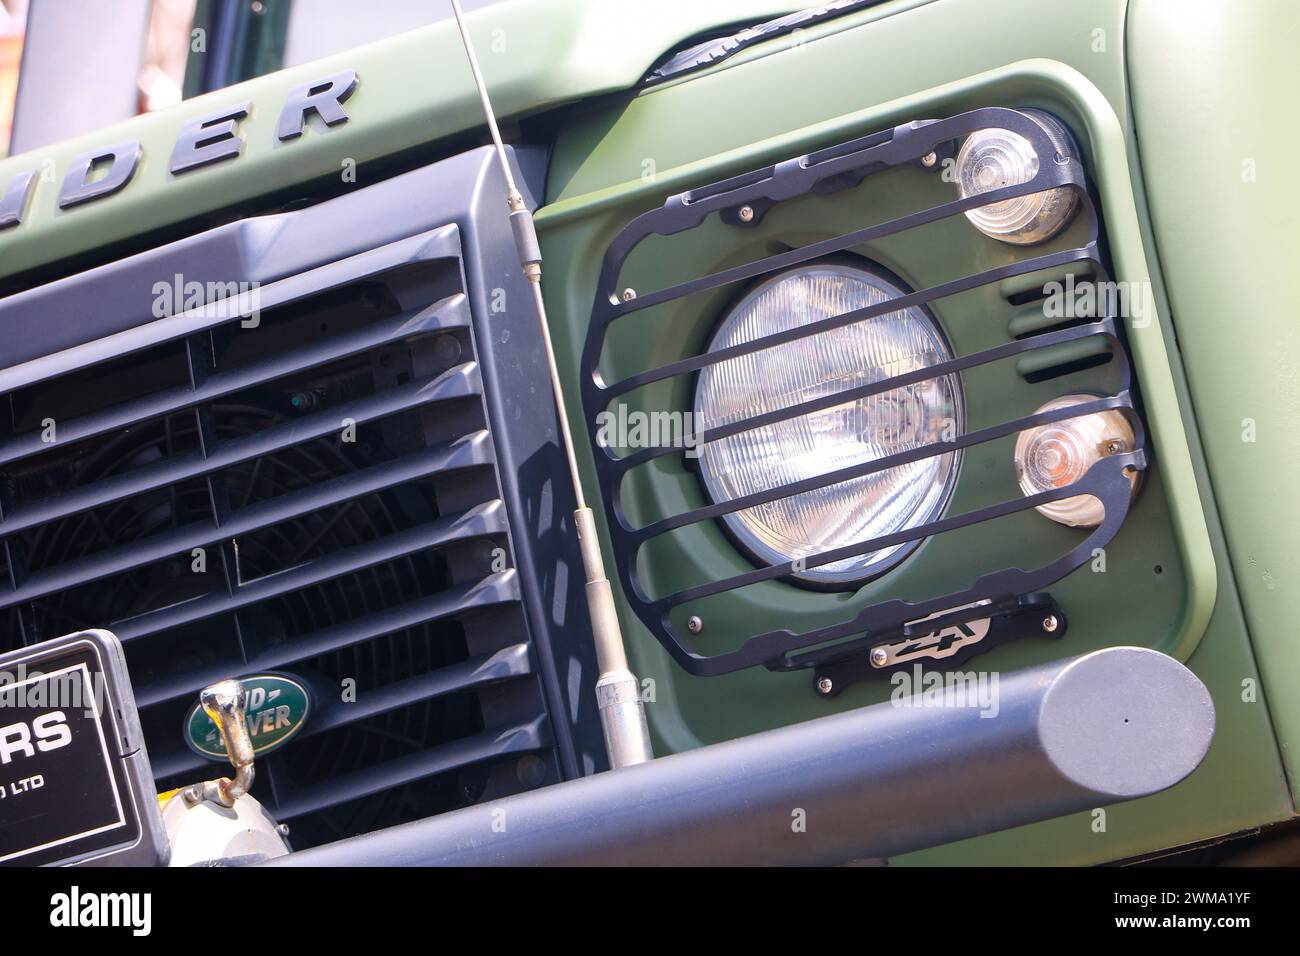 Landrover Defender Green Wrap Spotted at event in Sri Lanka. Stock Photo